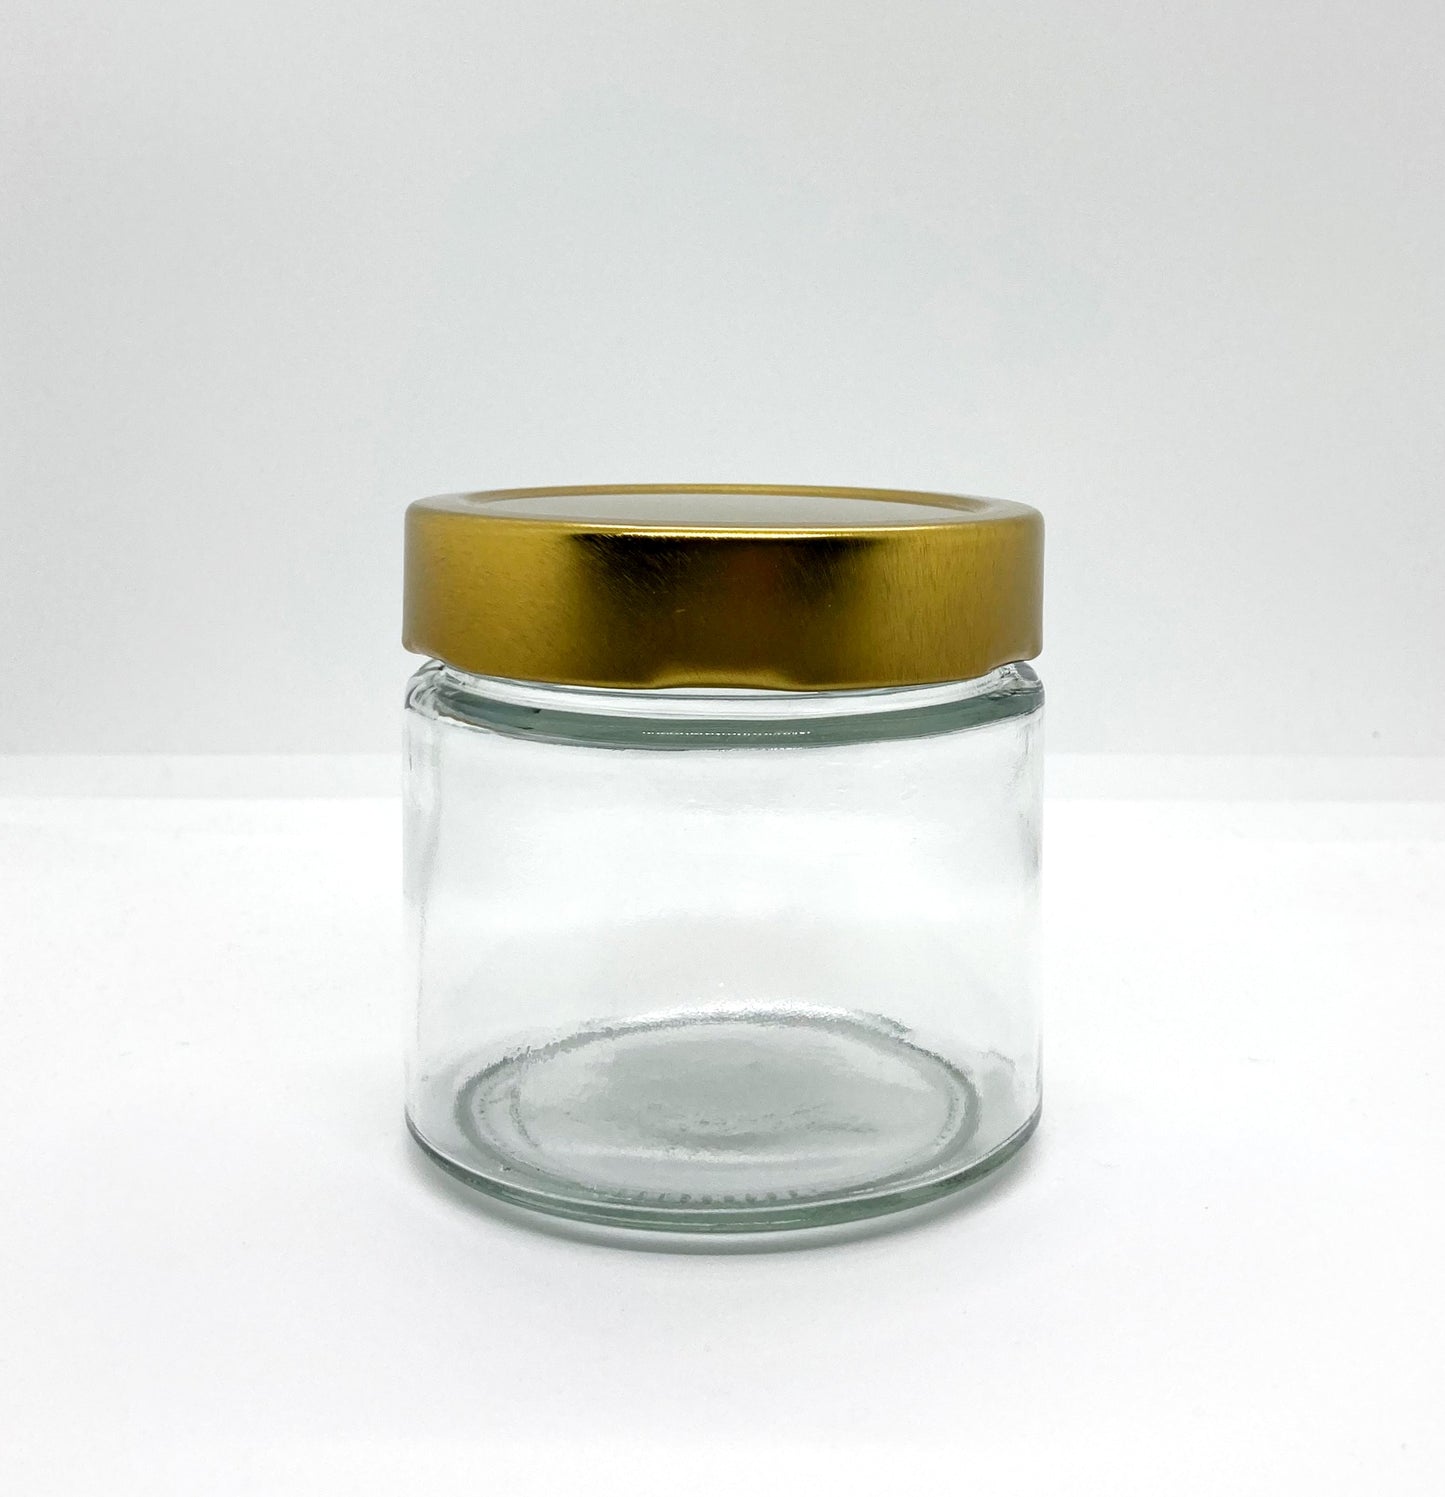 350mL. Clear Round Straight Cut Glass Jar and Deep Lid